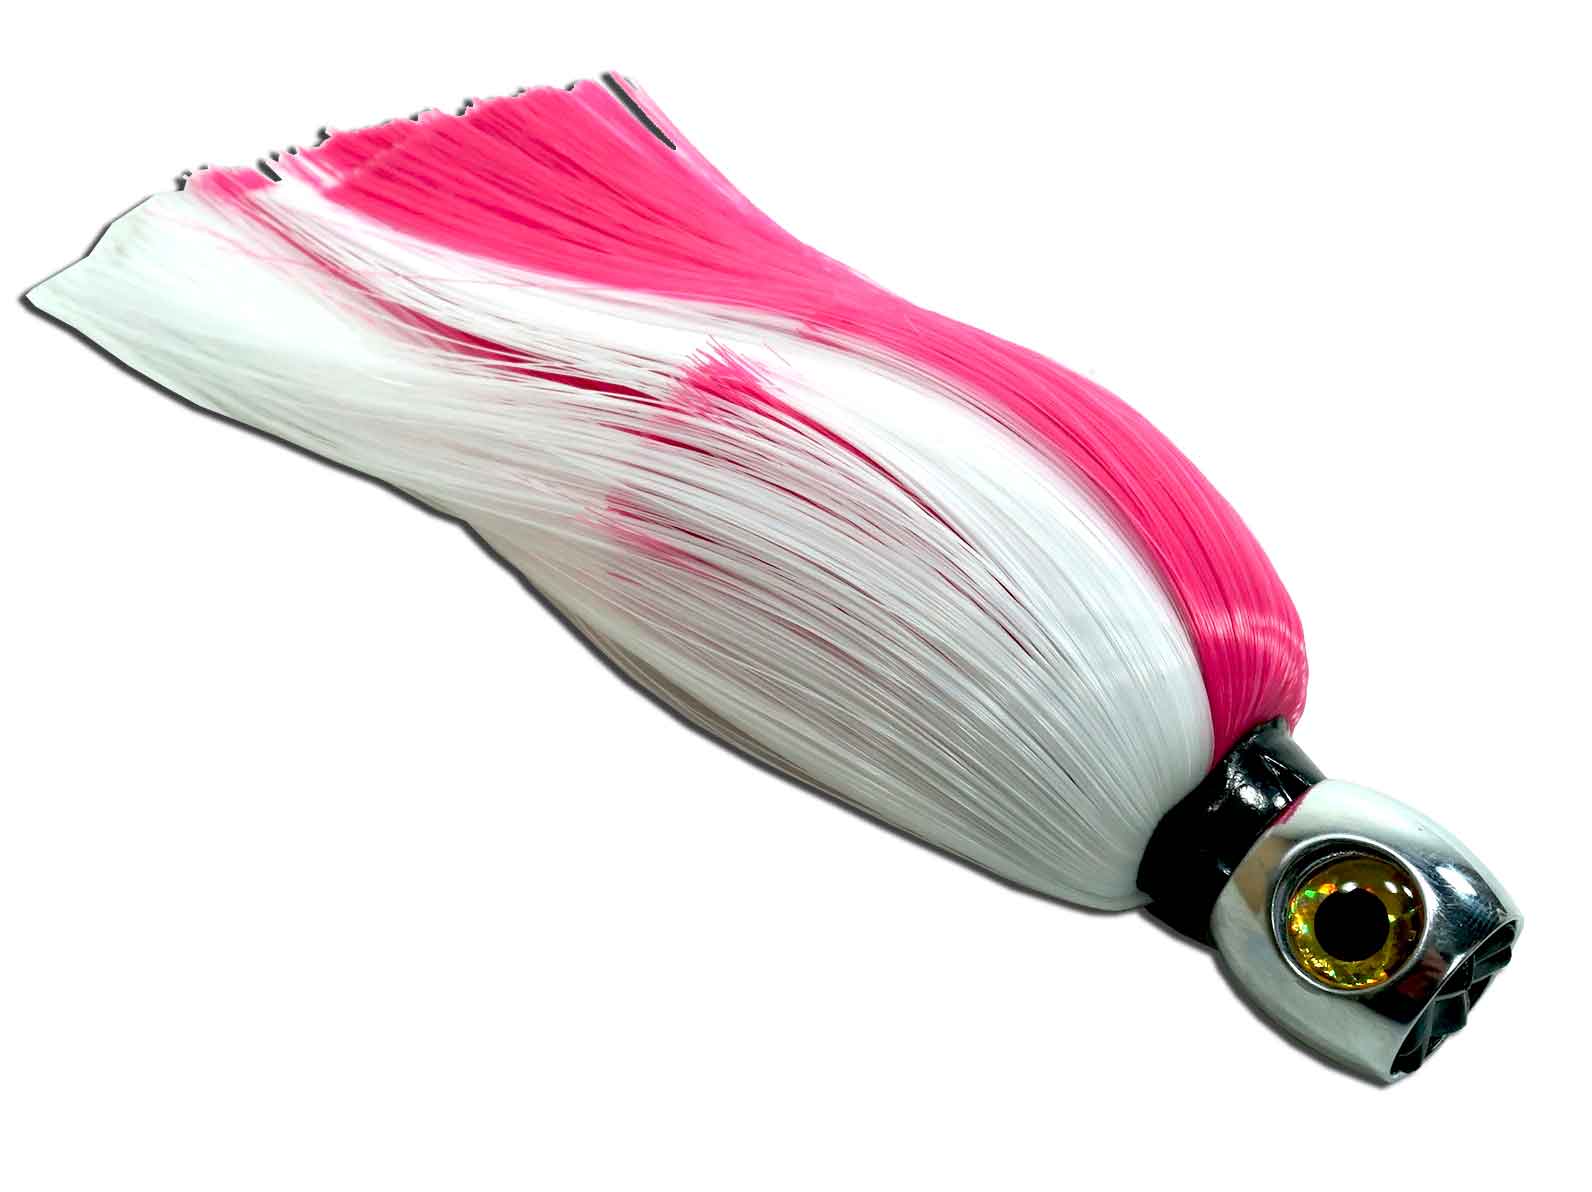 JET HEAD TROLLING LURE, 7.5 INCH, PINK/WHITE